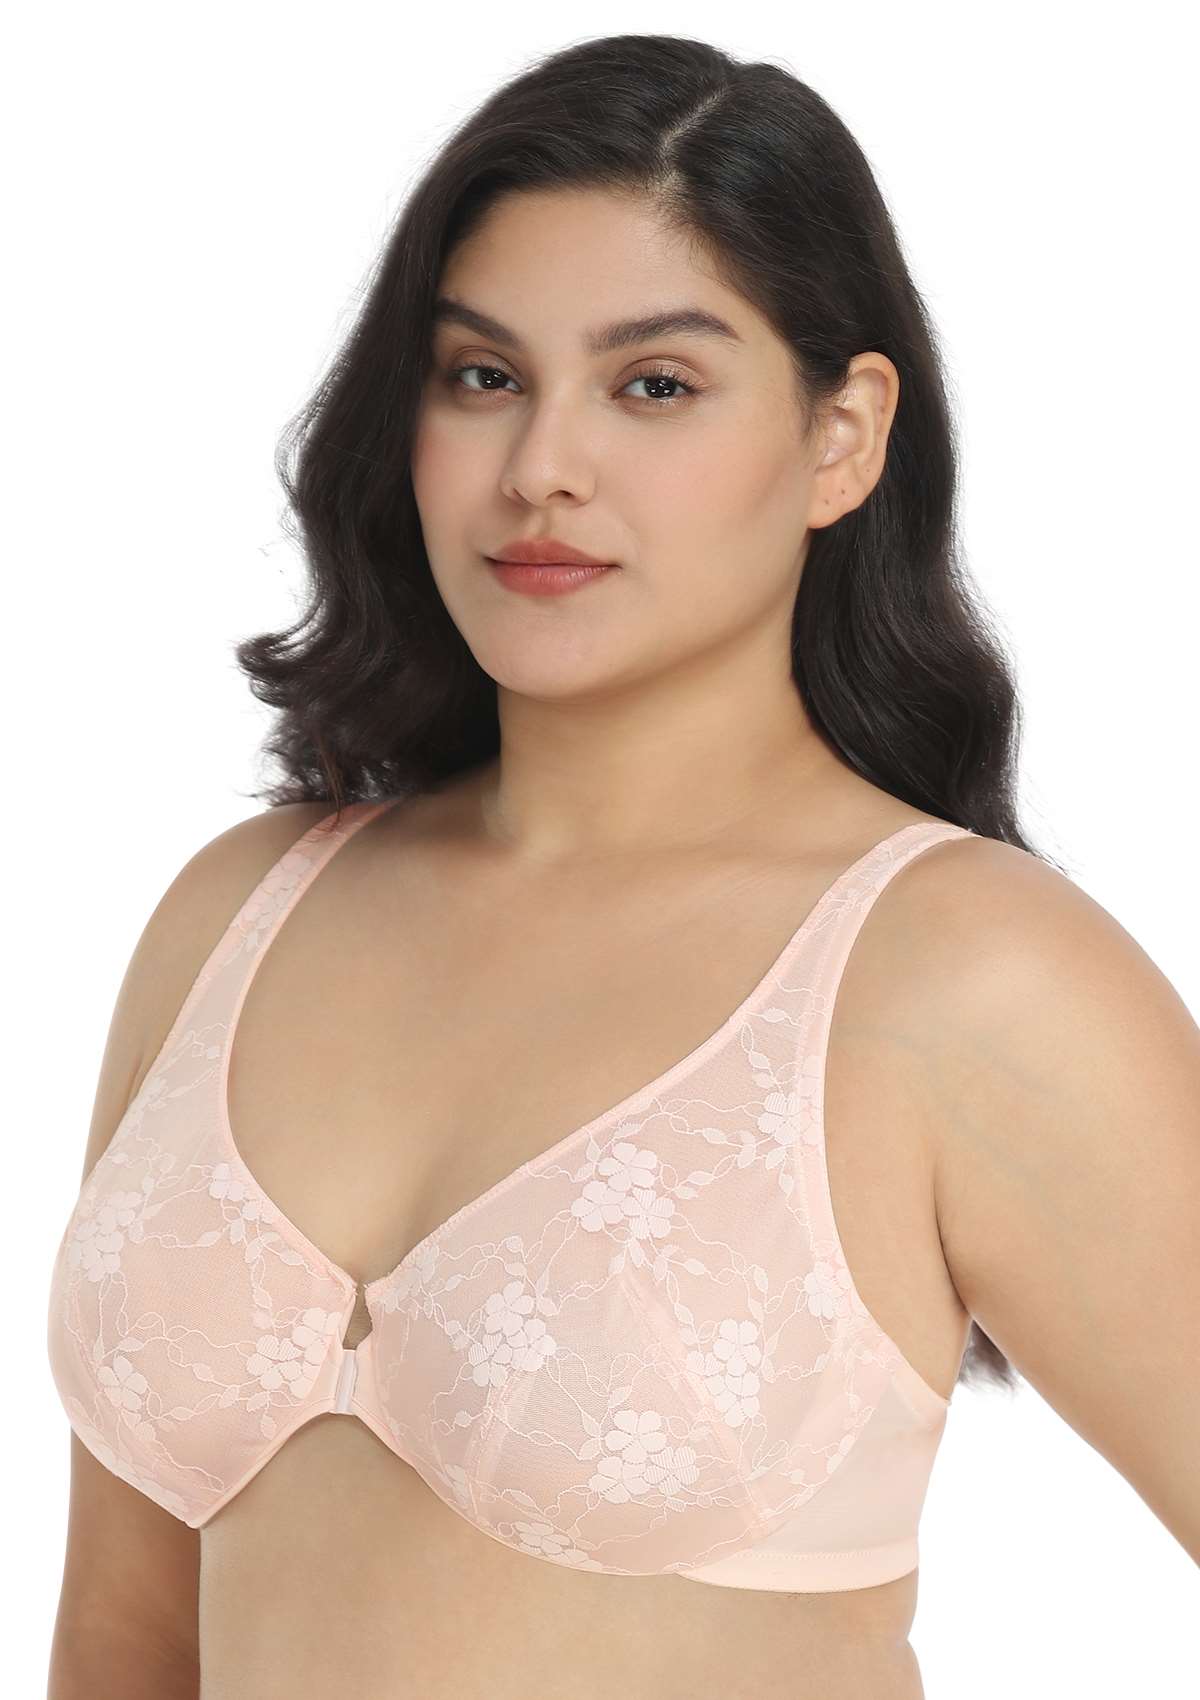 HSIA Spring Romance Front-Close Floral Lace Unlined Full Coverage Bra - White / 36 / H